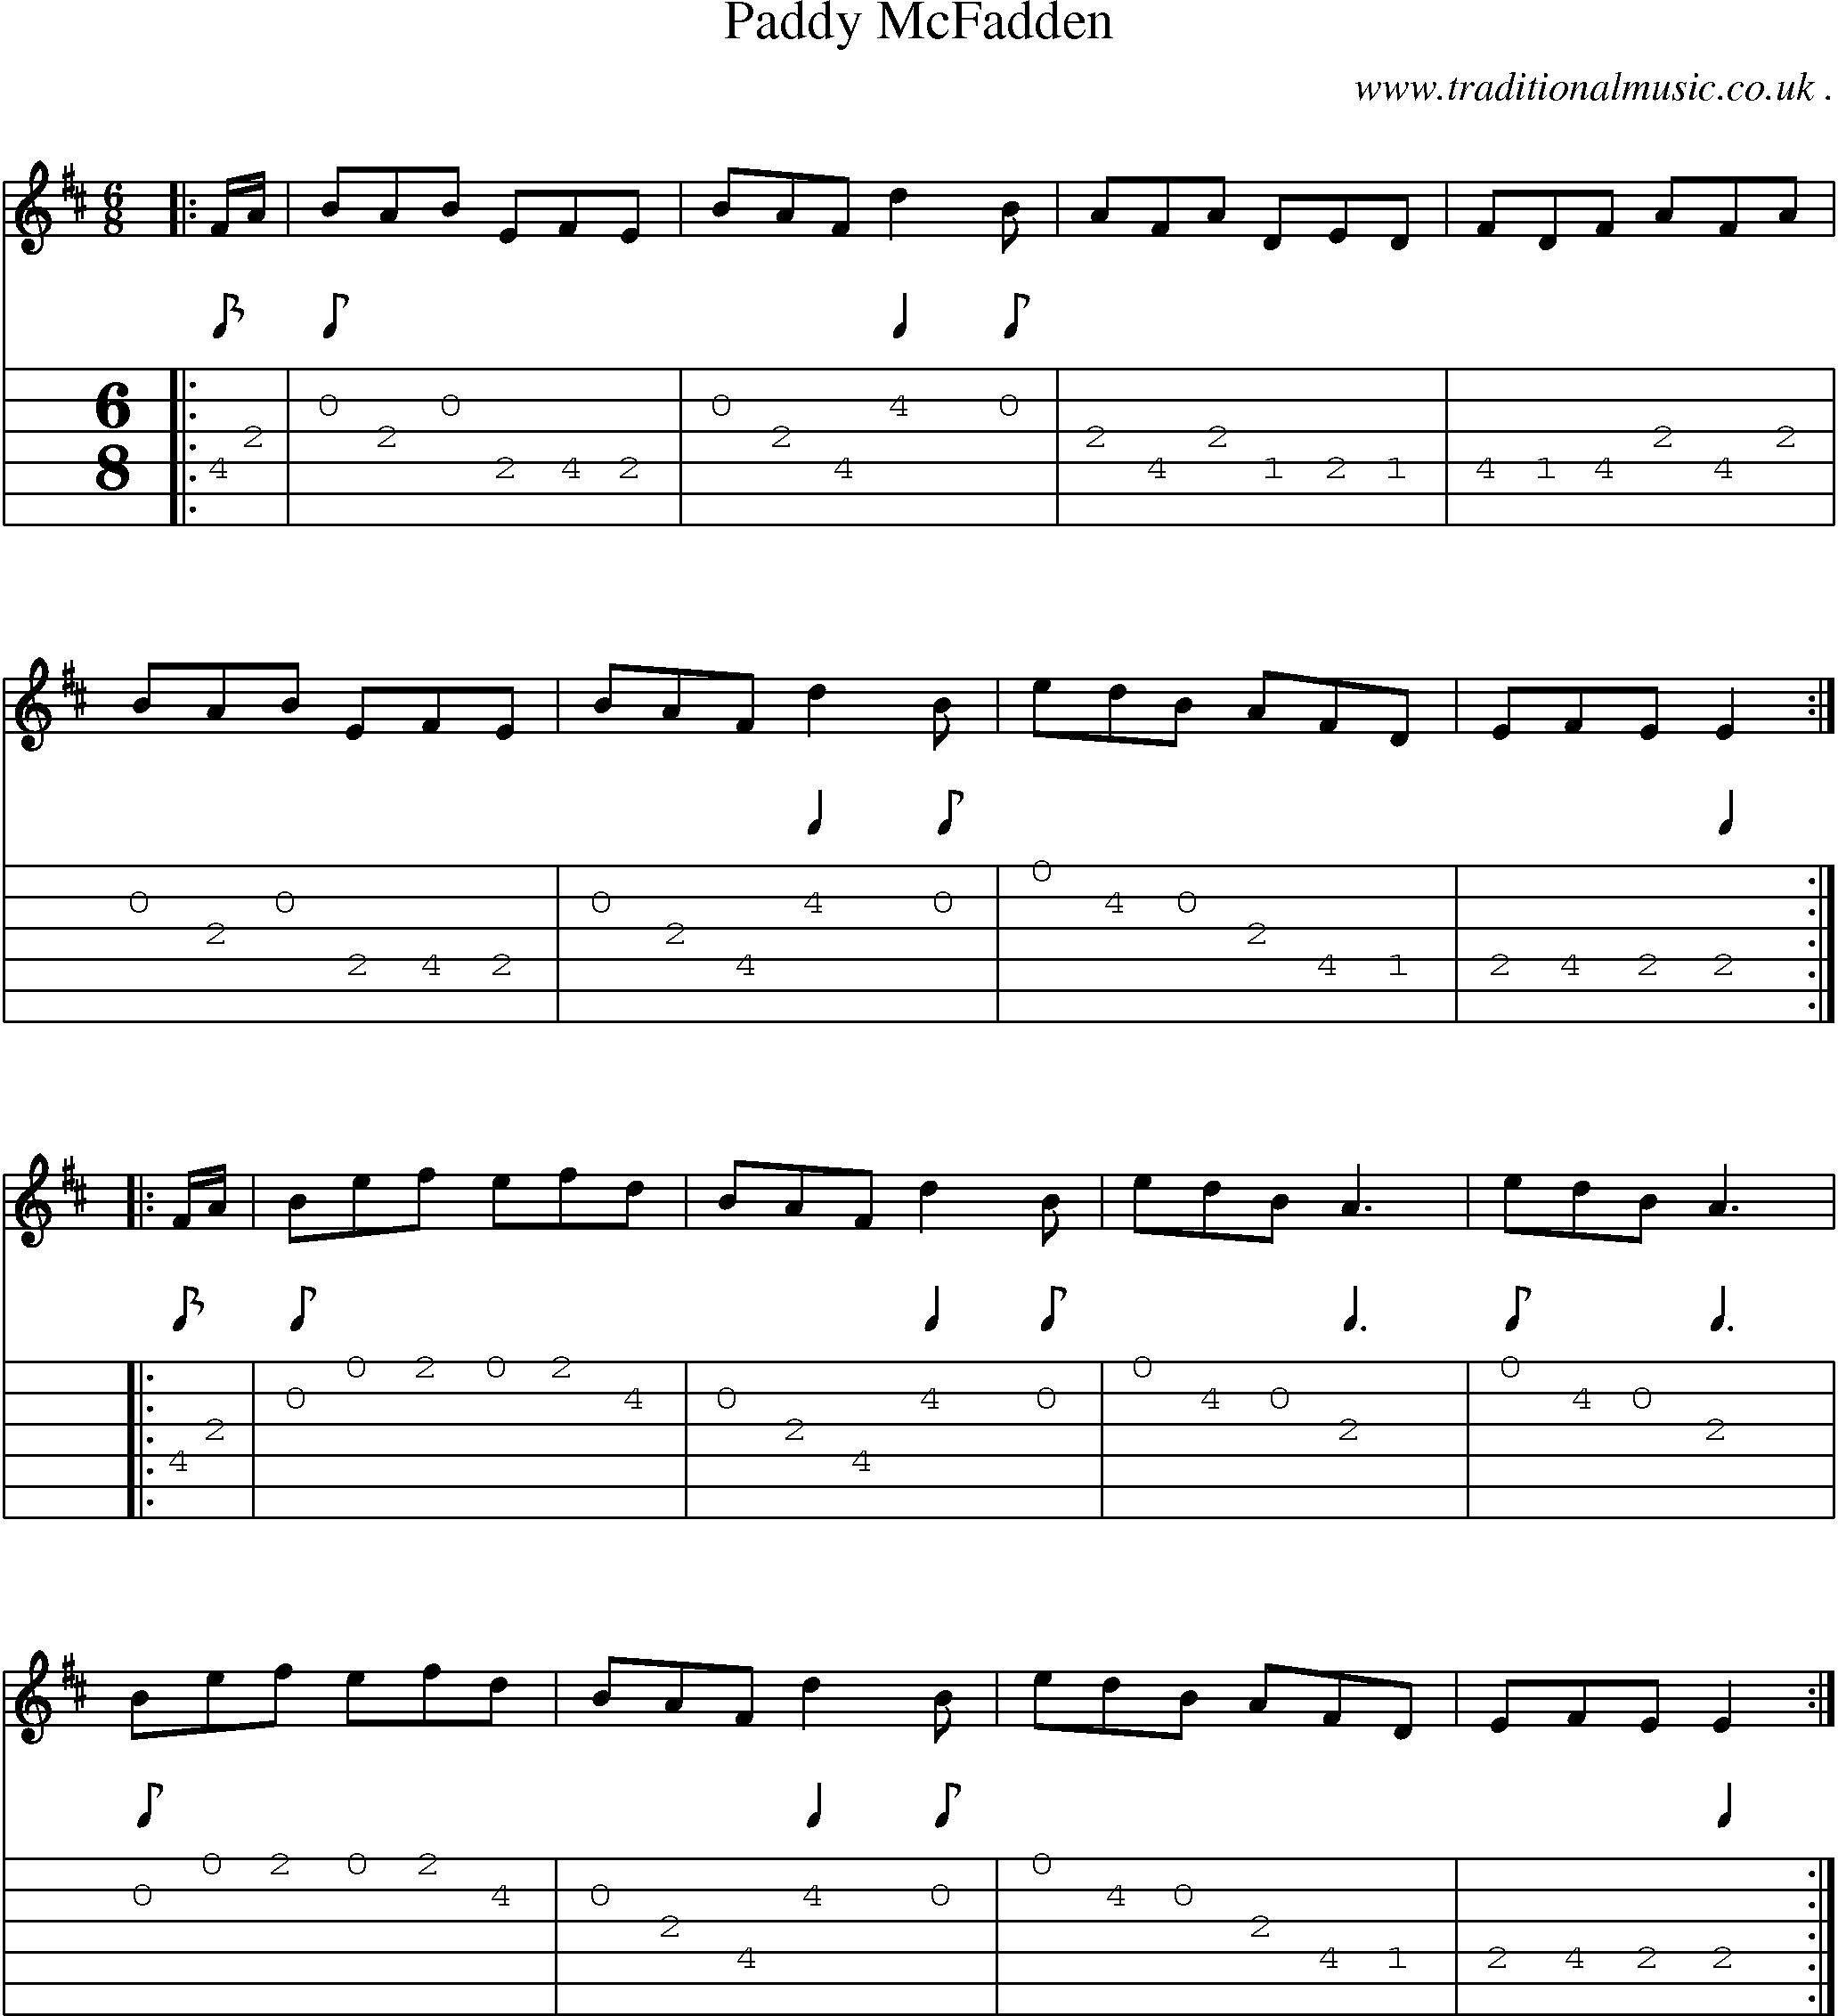 Sheet-Music and Guitar Tabs for Paddy Mcfadden